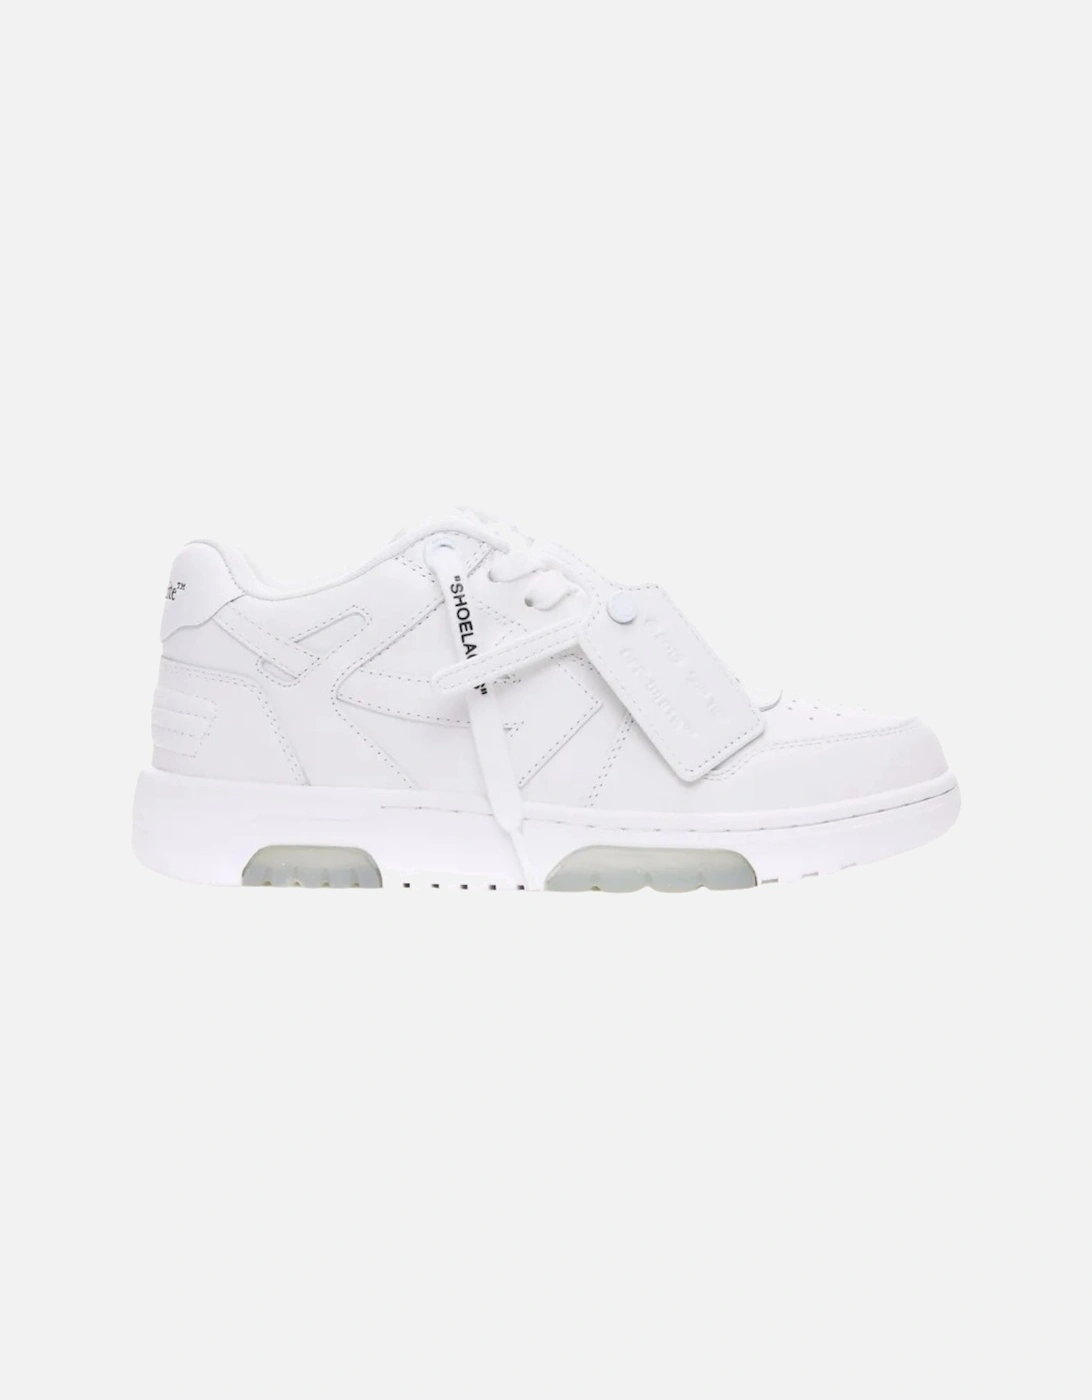 OOO White Calf Leather Sneakers, 4 of 3